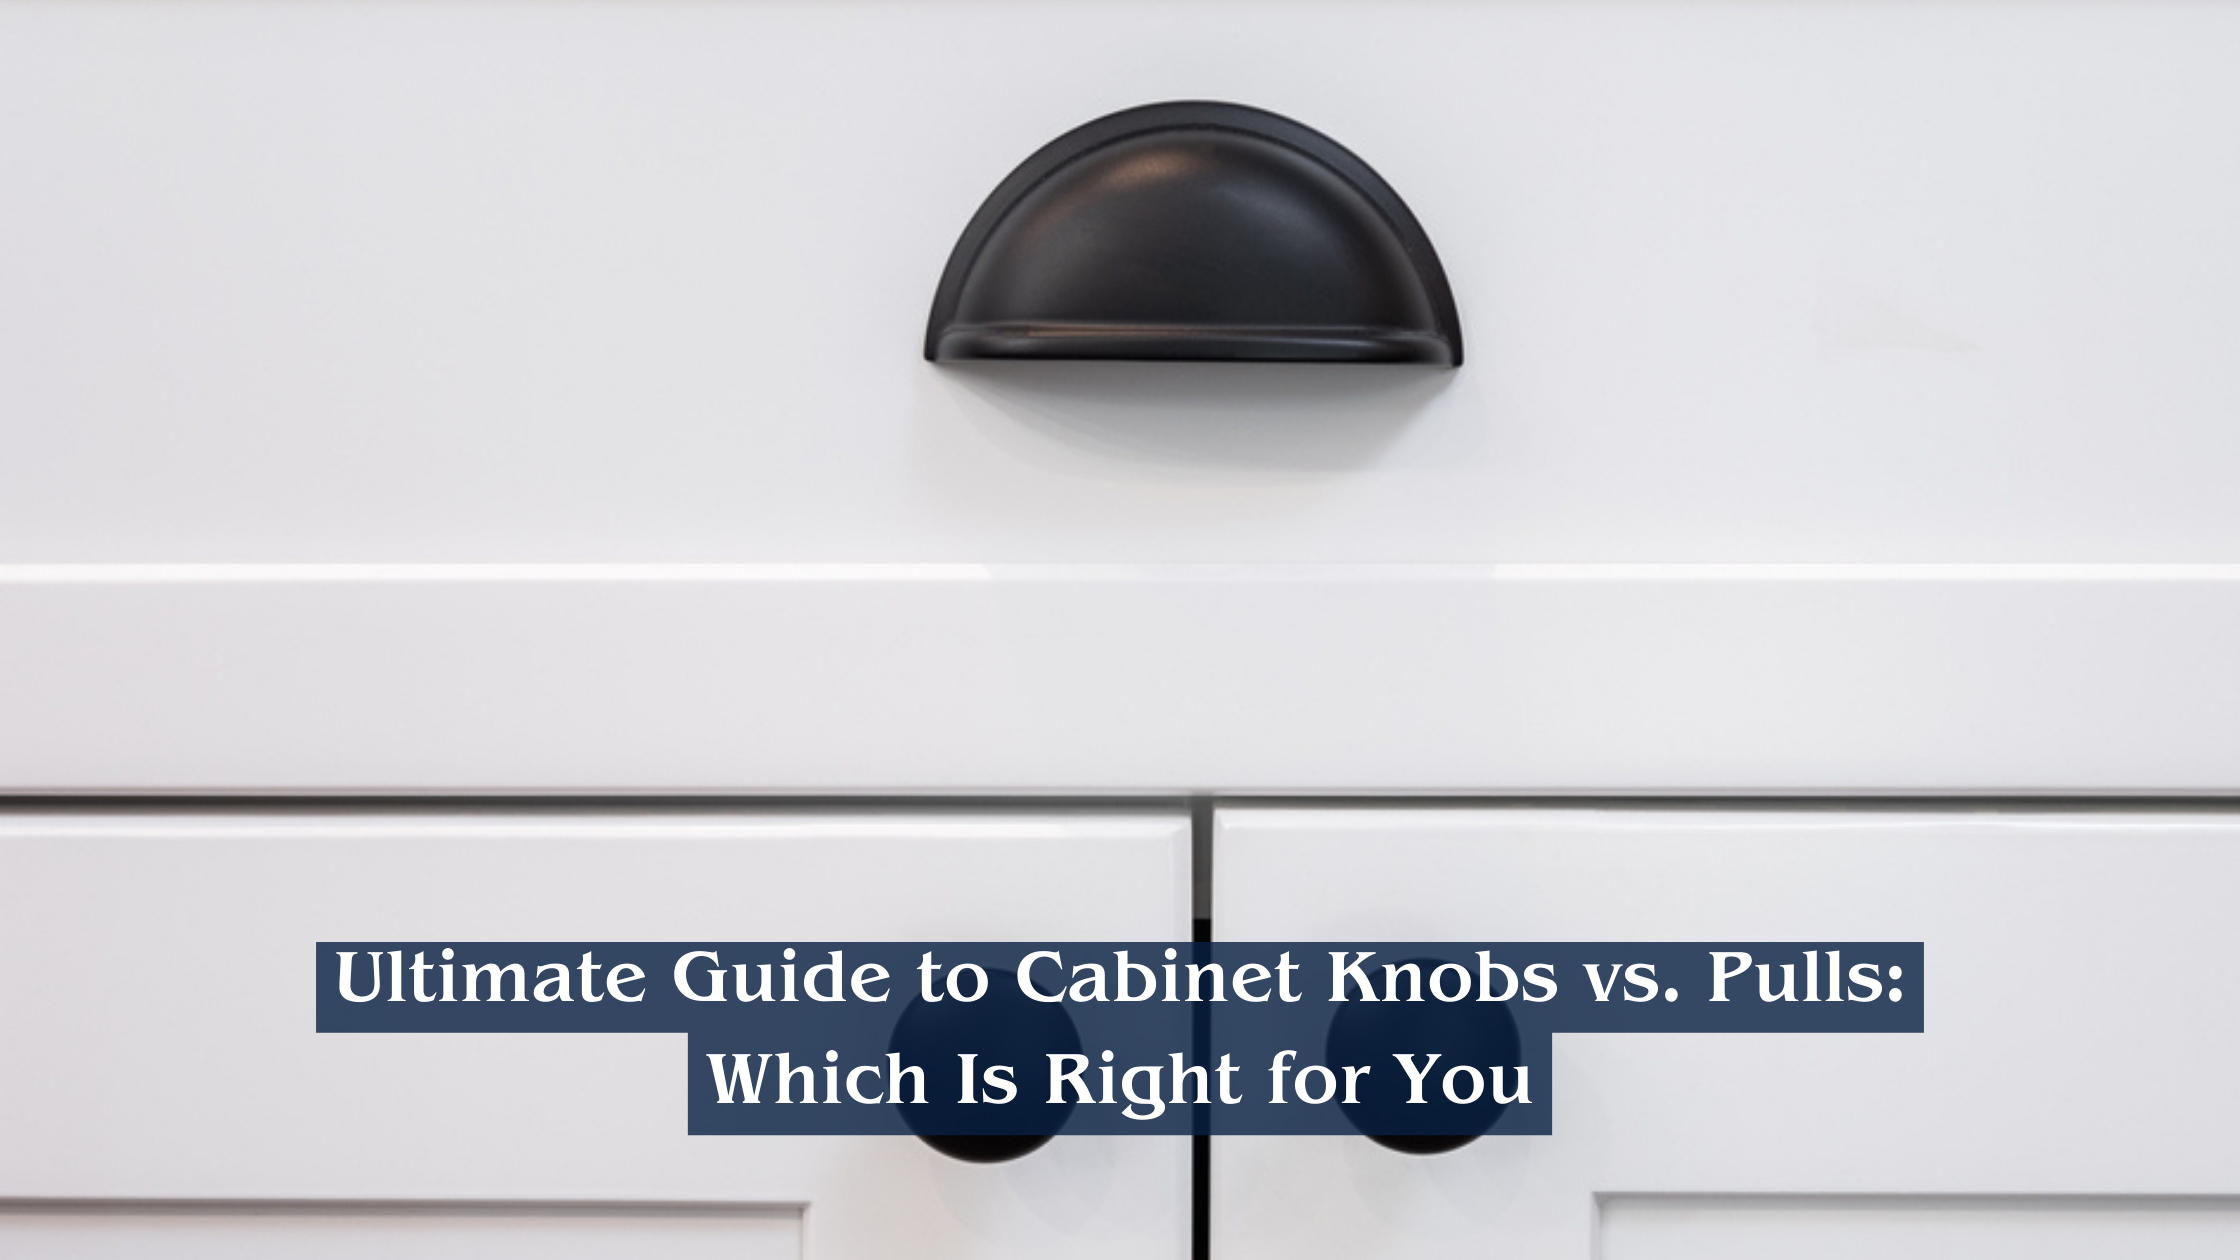 Cabinet Knobs vs. Pulls: Which Is Right for You?